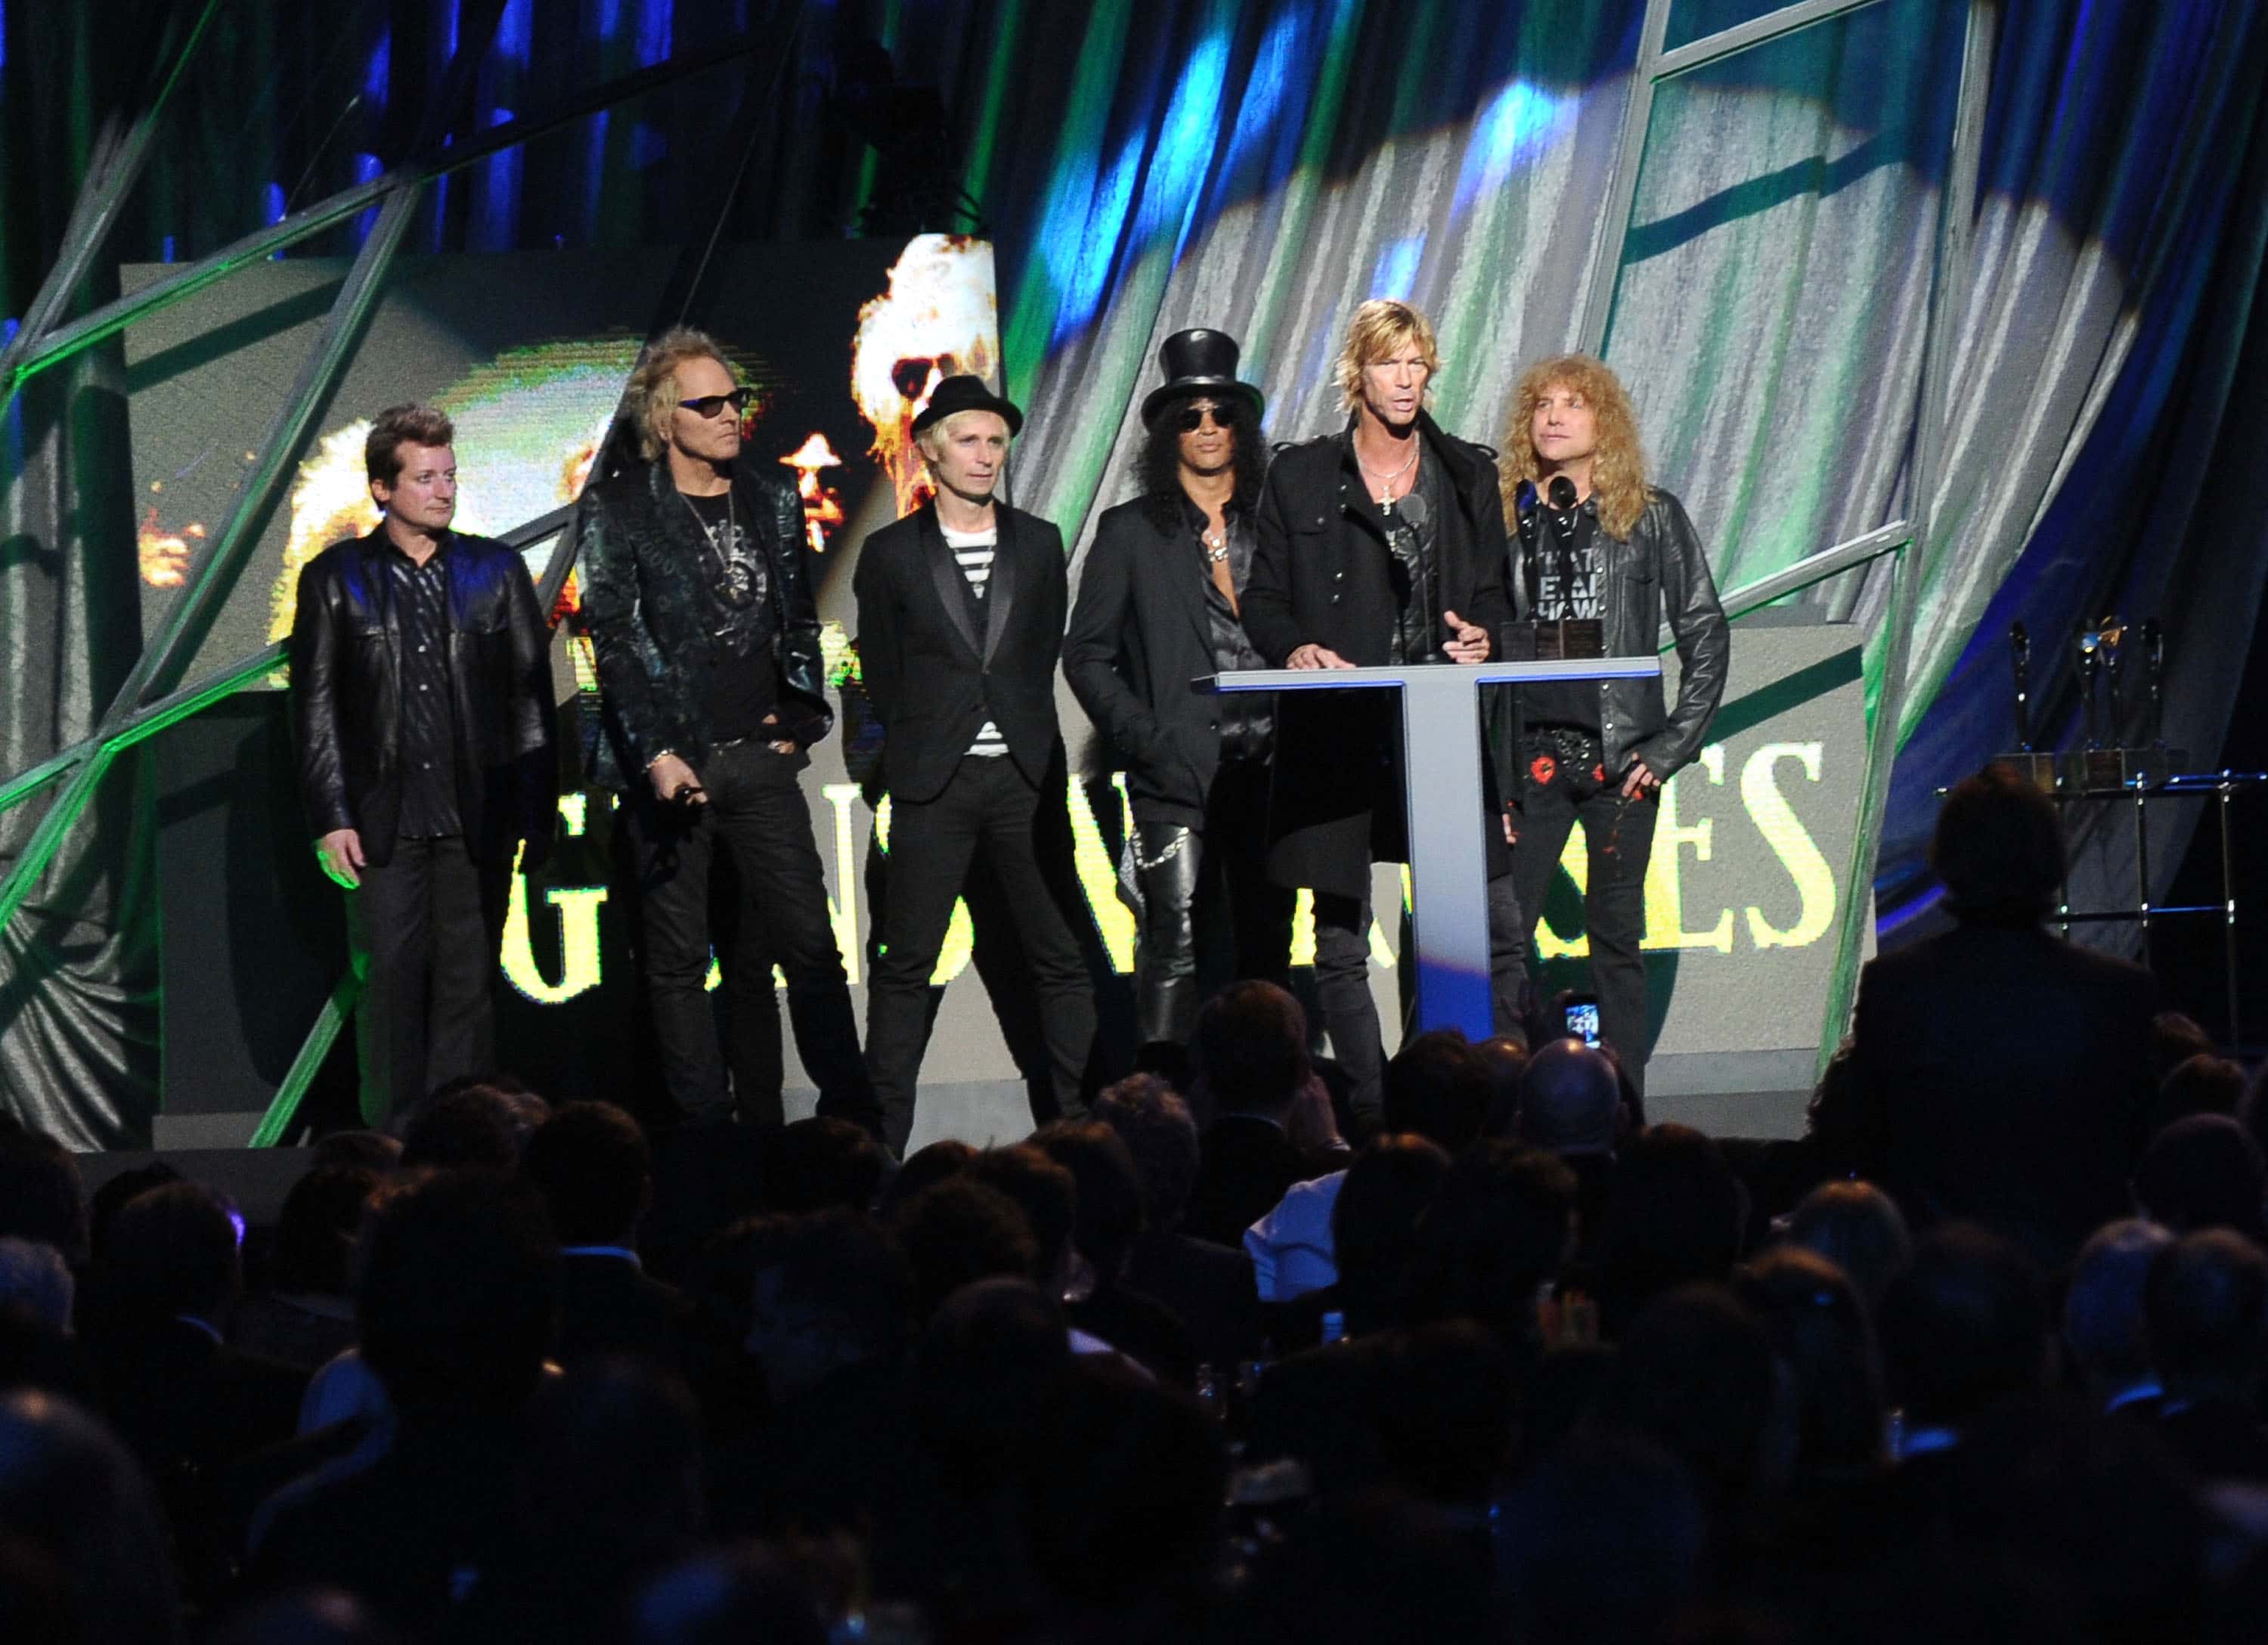 <p>In 2012, Guns N’ Roses’ classic lineup (Axl Rose, Duff McKagan, Dizzy Reed, Slash, Matt Sorum, Steven Adler, and Izzy Stradlin) were inducted into the Rock and Roll Hall of Fame. It also happened to be the first year that they were eligible.</p>